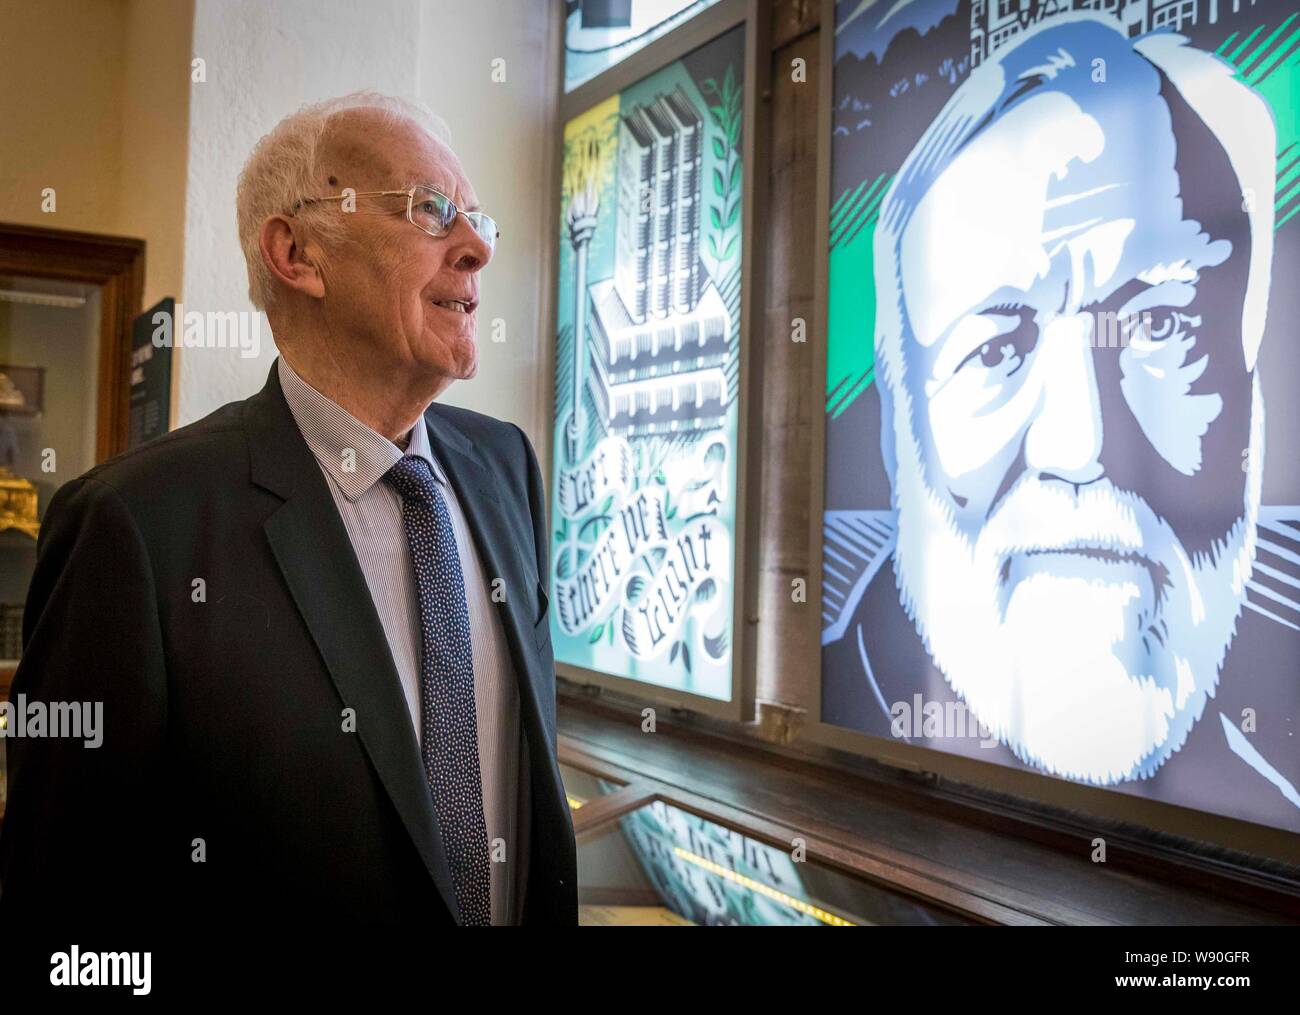 Dunfermline, UK. 12th Aug, 2019. Sir Ian Wood has been announced as one of the recipients of the Carnegie Medal of Philanthropy at the Carnegie Birthplace Museum in Dunfermline. The other medalists who will also receive their awards at a ceremony in New York in October are Anne G Earhart, Mellody Hobson and George Lucas, Marie-Josee and Henry R Kravis, Morton L Mandel, Robert F Smith and Dr Leonard Tow. Pictured: Sir Ian Wood at the Carnegie Birthplace Museum Credit: Rich Dyson/Alamy Live News Stock Photo